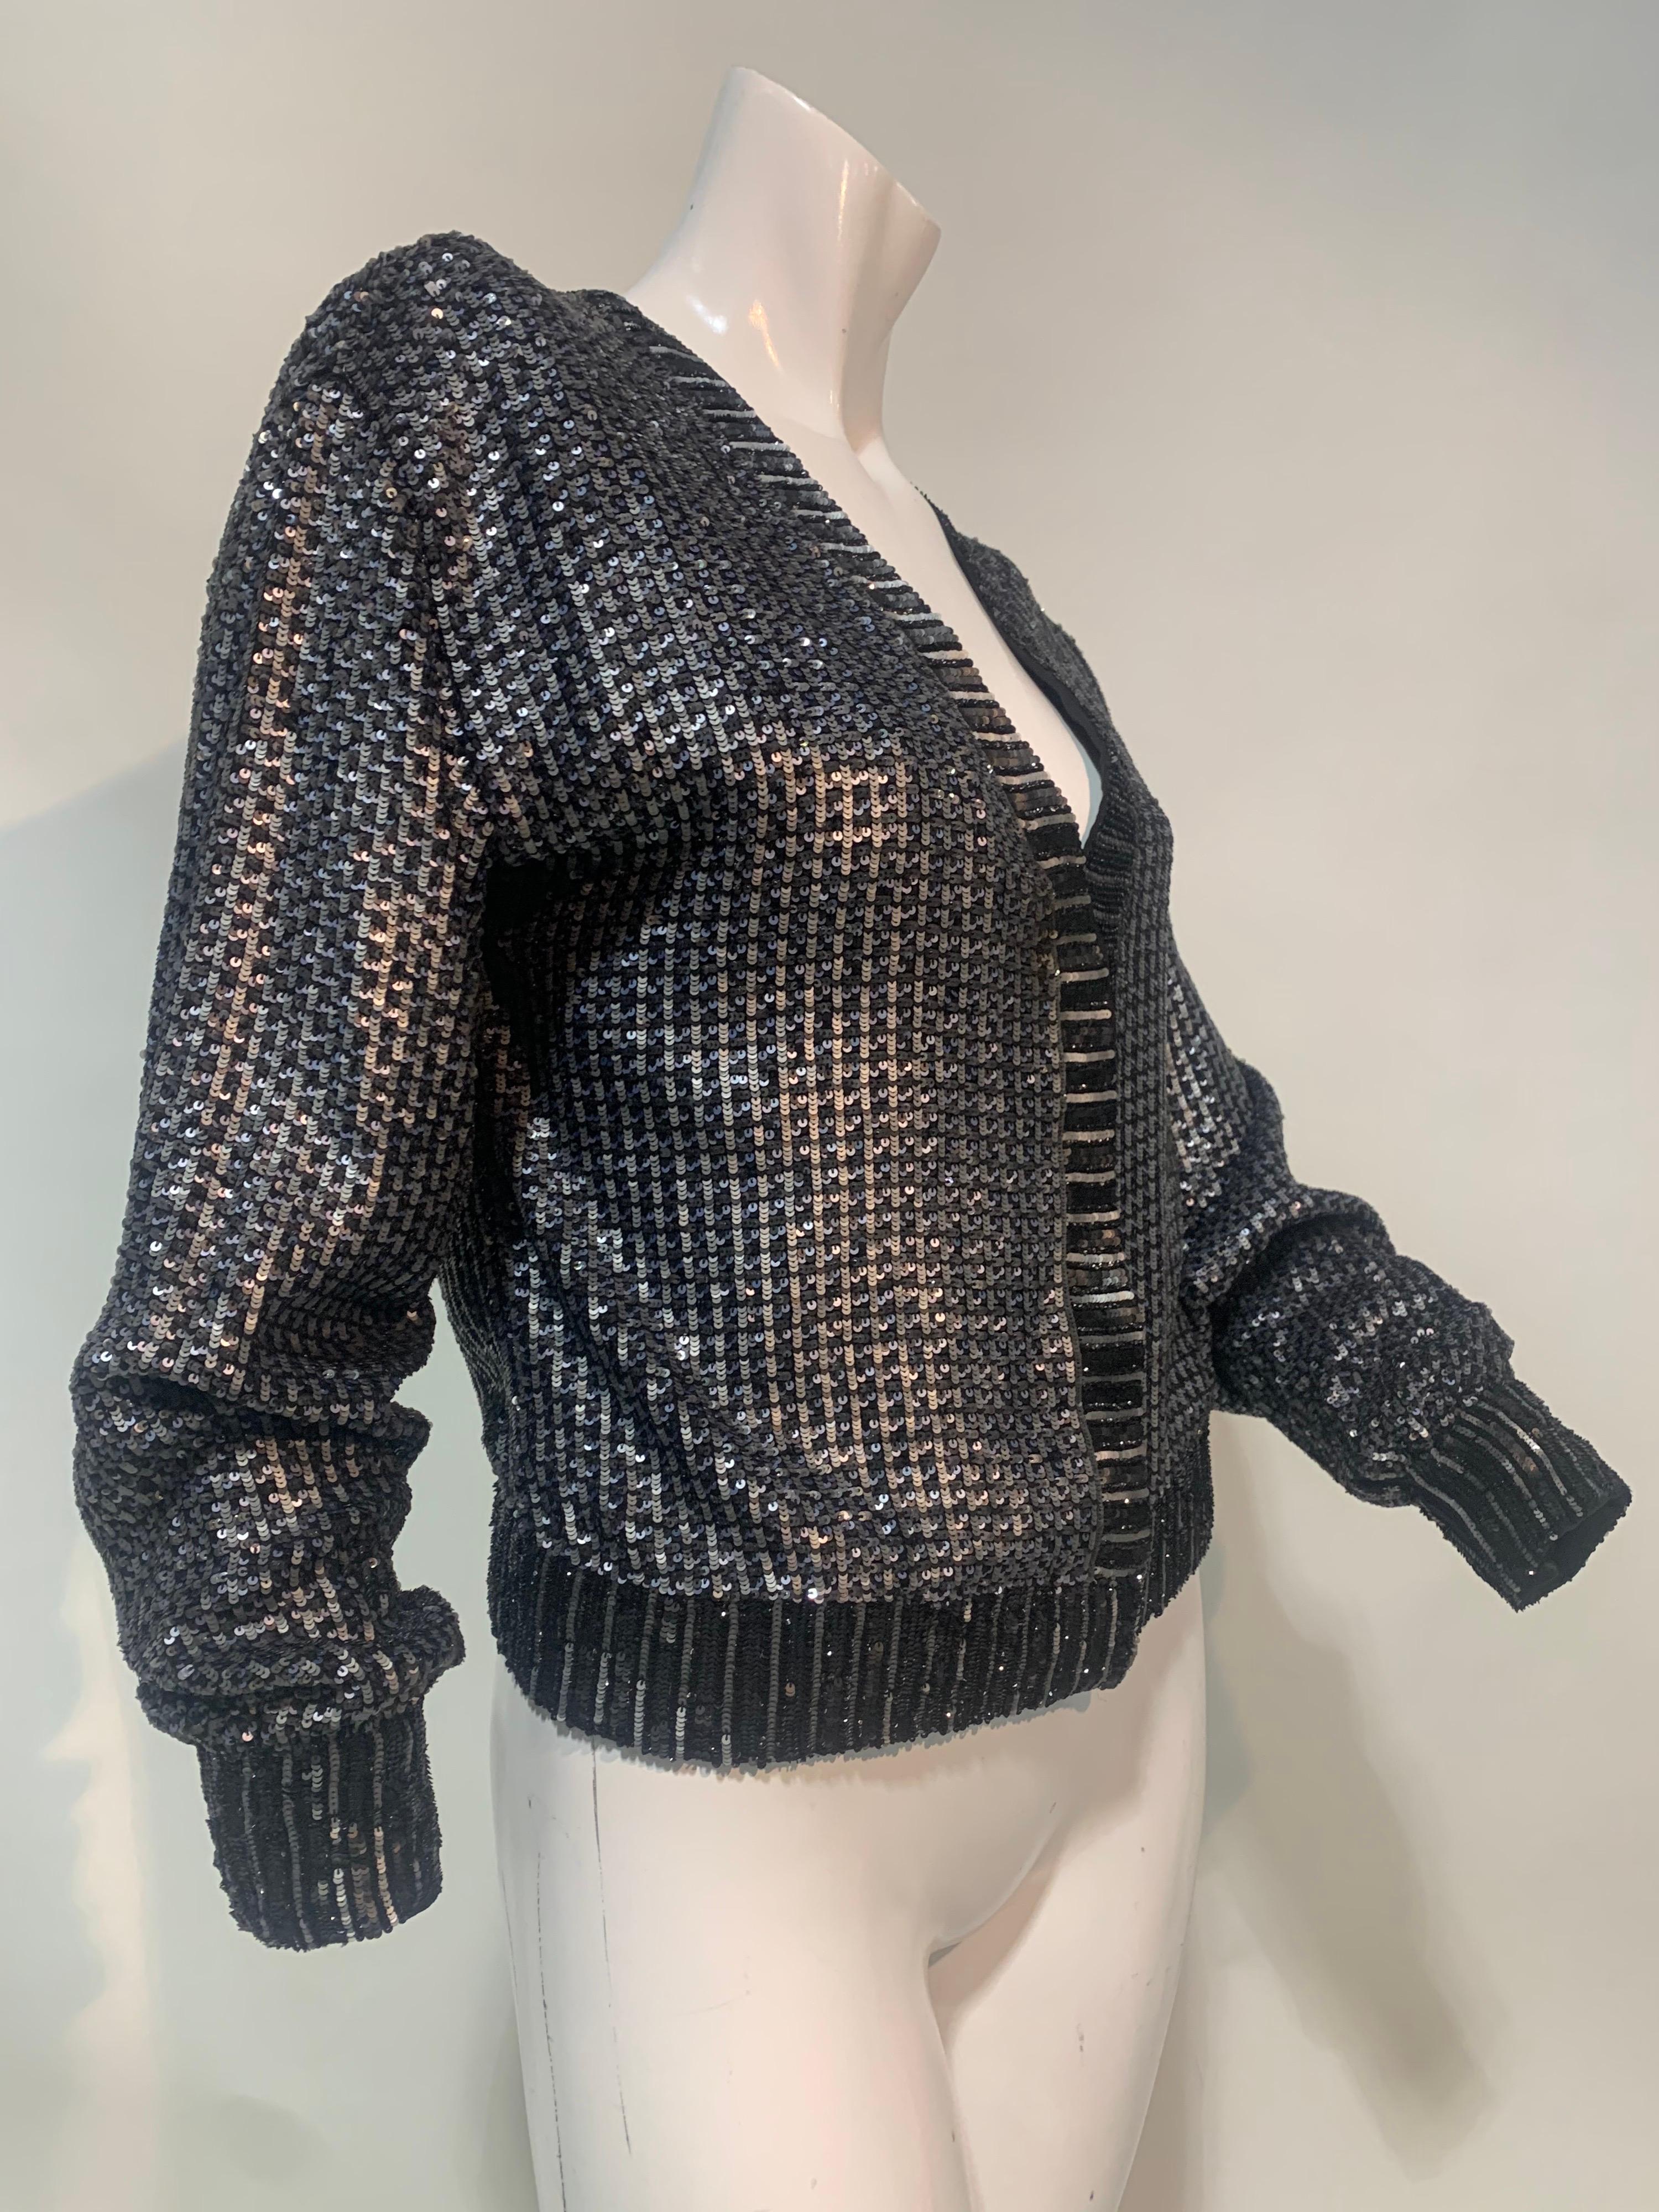 A slinky 1990s Karl Lagerfeld gray silk mesh cardigan-style jacket covered completely in small gunmetal sequins. Front snap closures. Sequin configuration gives a ribbed effect at hem and edgings. Size EU 42.